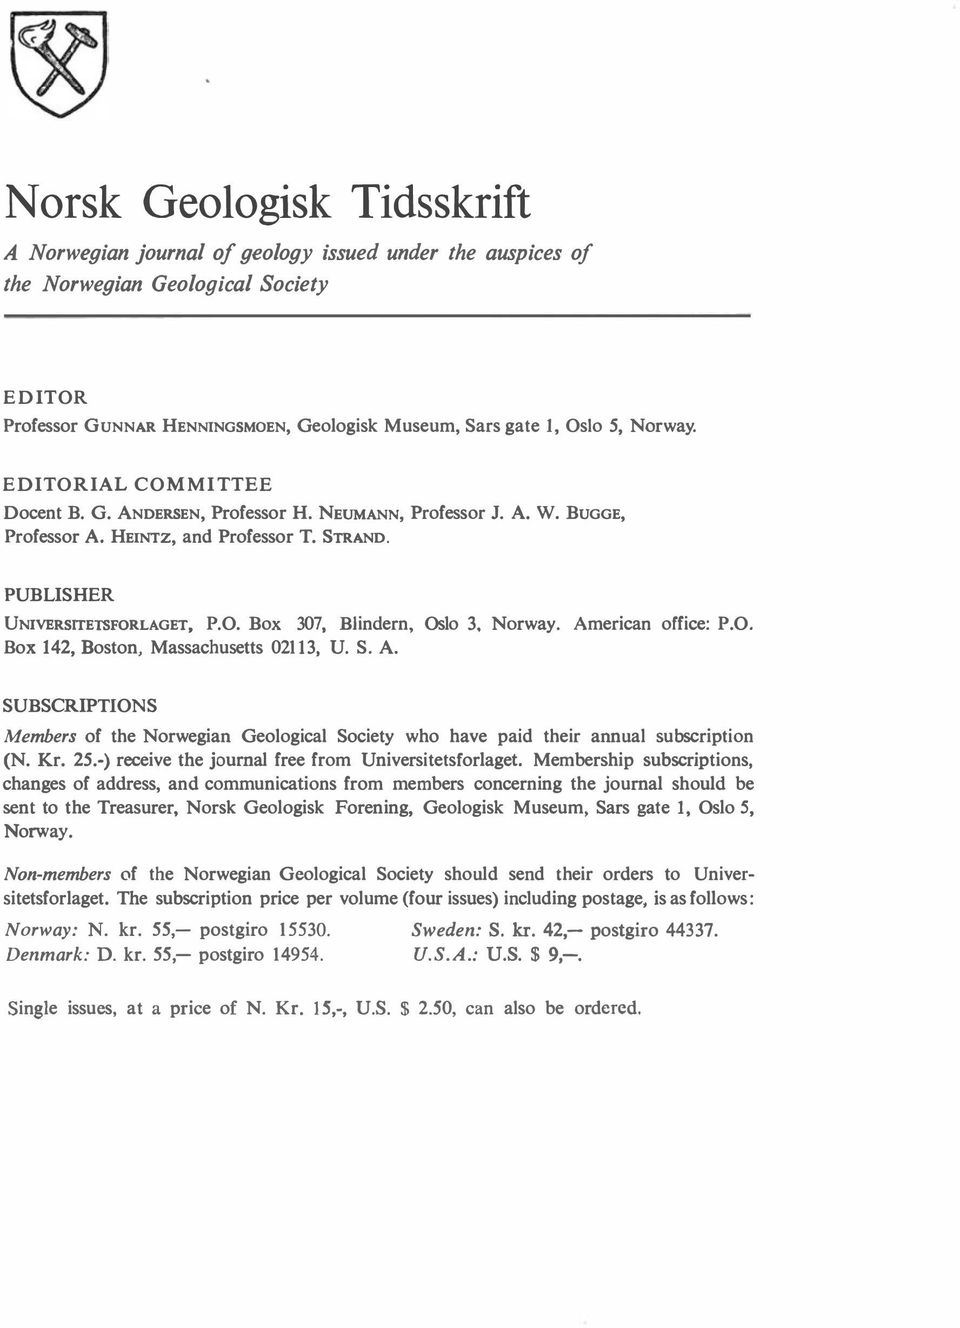 Norway. American office: P.O. Box 142, Boston, Massachusetts 02113, U. S. A. SUBSCRIPTIONS Members of the Norwegian GeologicaJ Society who have paid their annual subscription (N. Kr. 25.